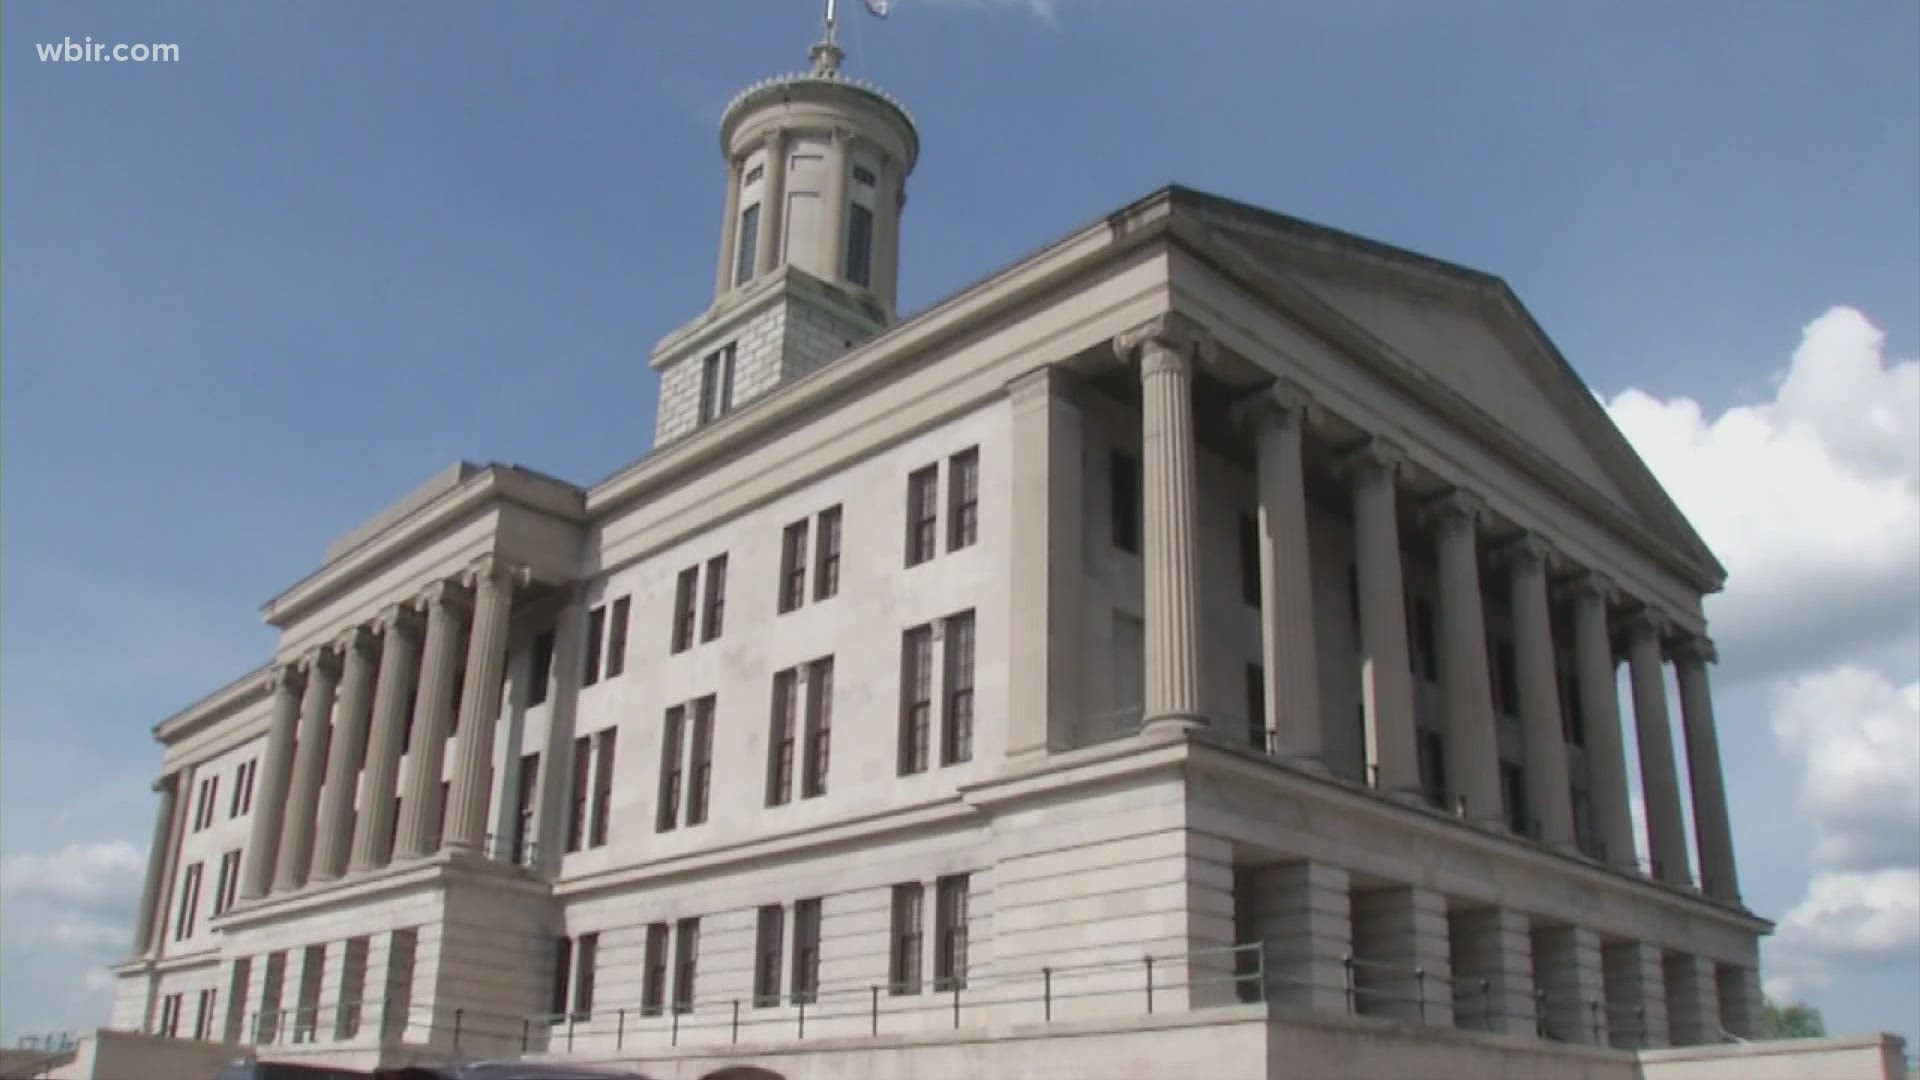 It could cost taxpayers hundreds of thousands of dollars to fight lawsuits against new Tennessee laws that some are calling "unconstitutional."